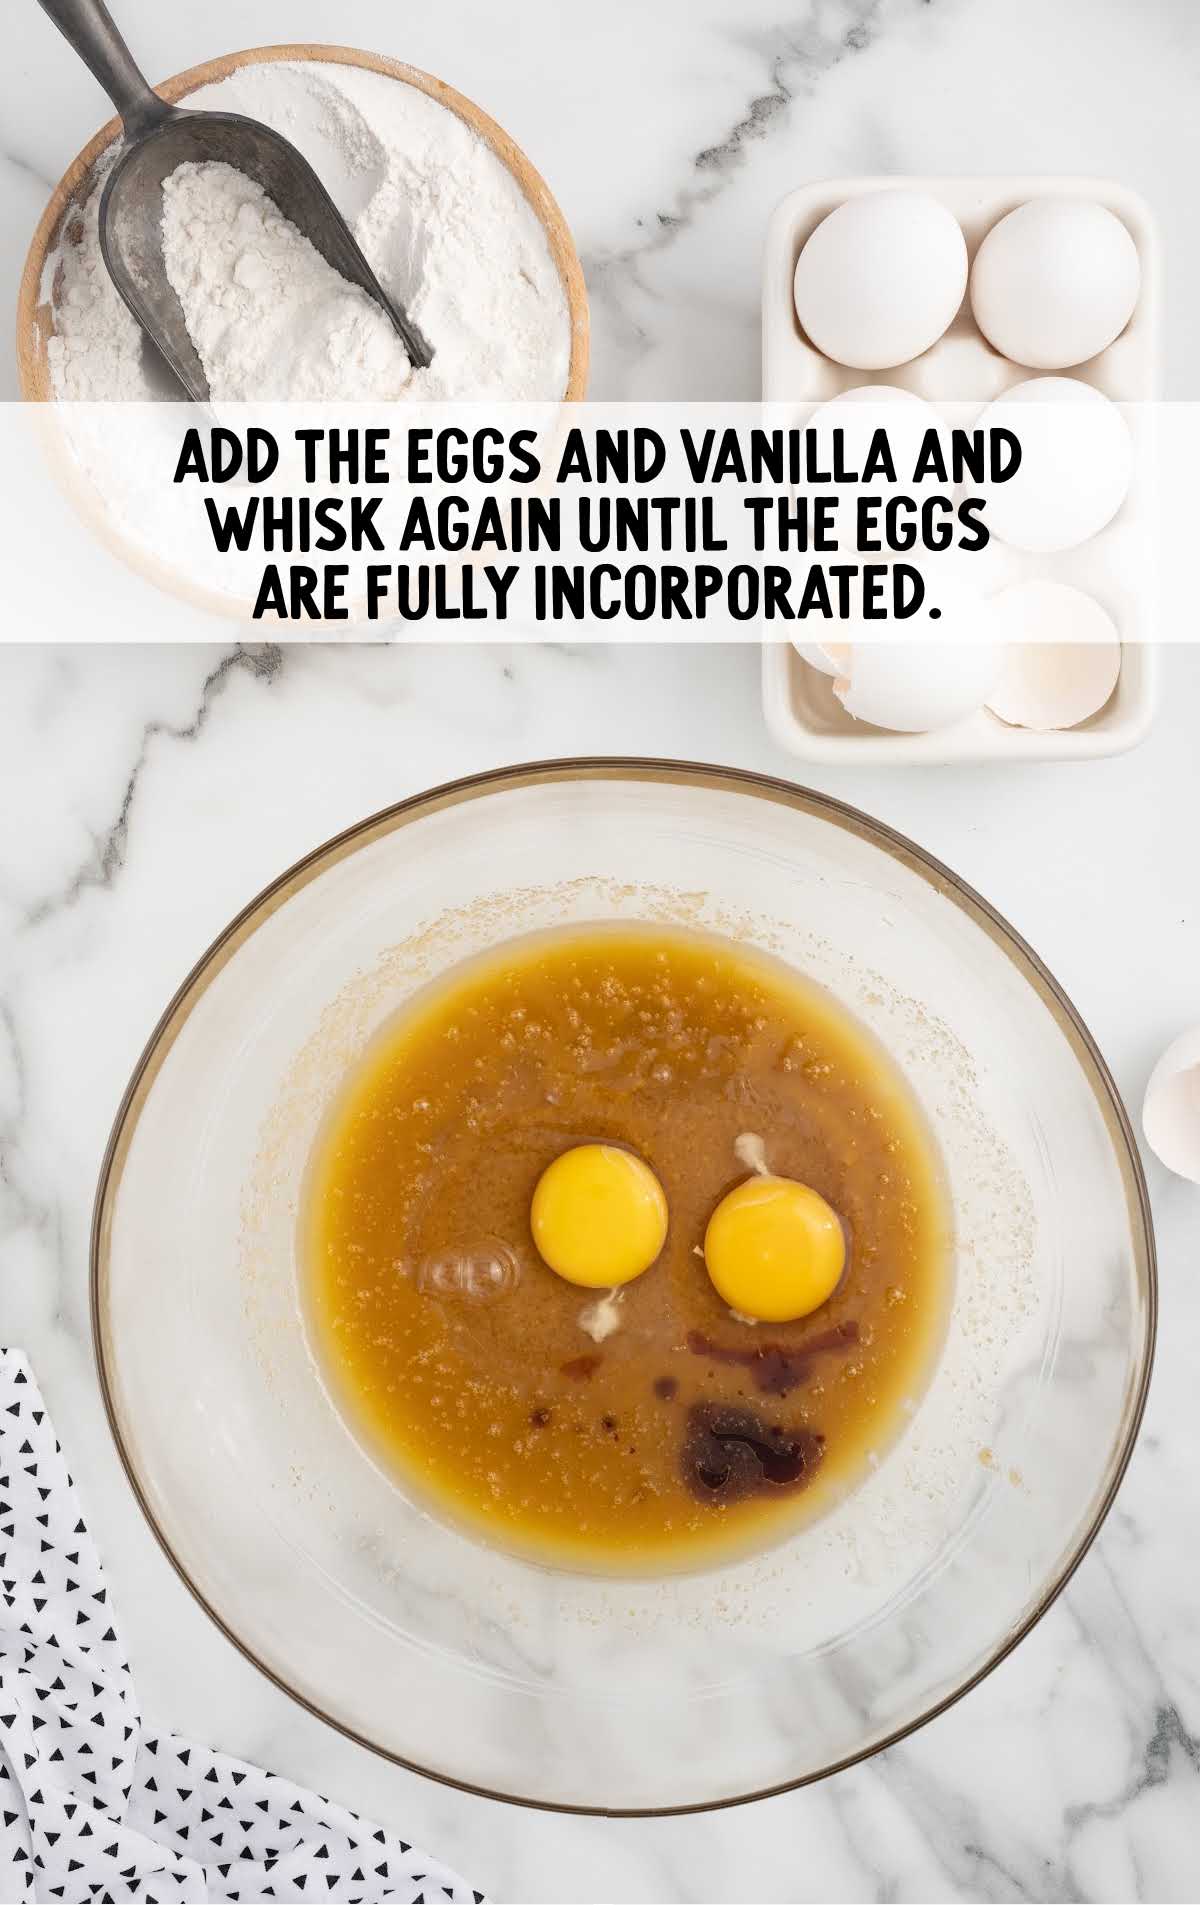 eggs and vanilla extract combined in a bowl